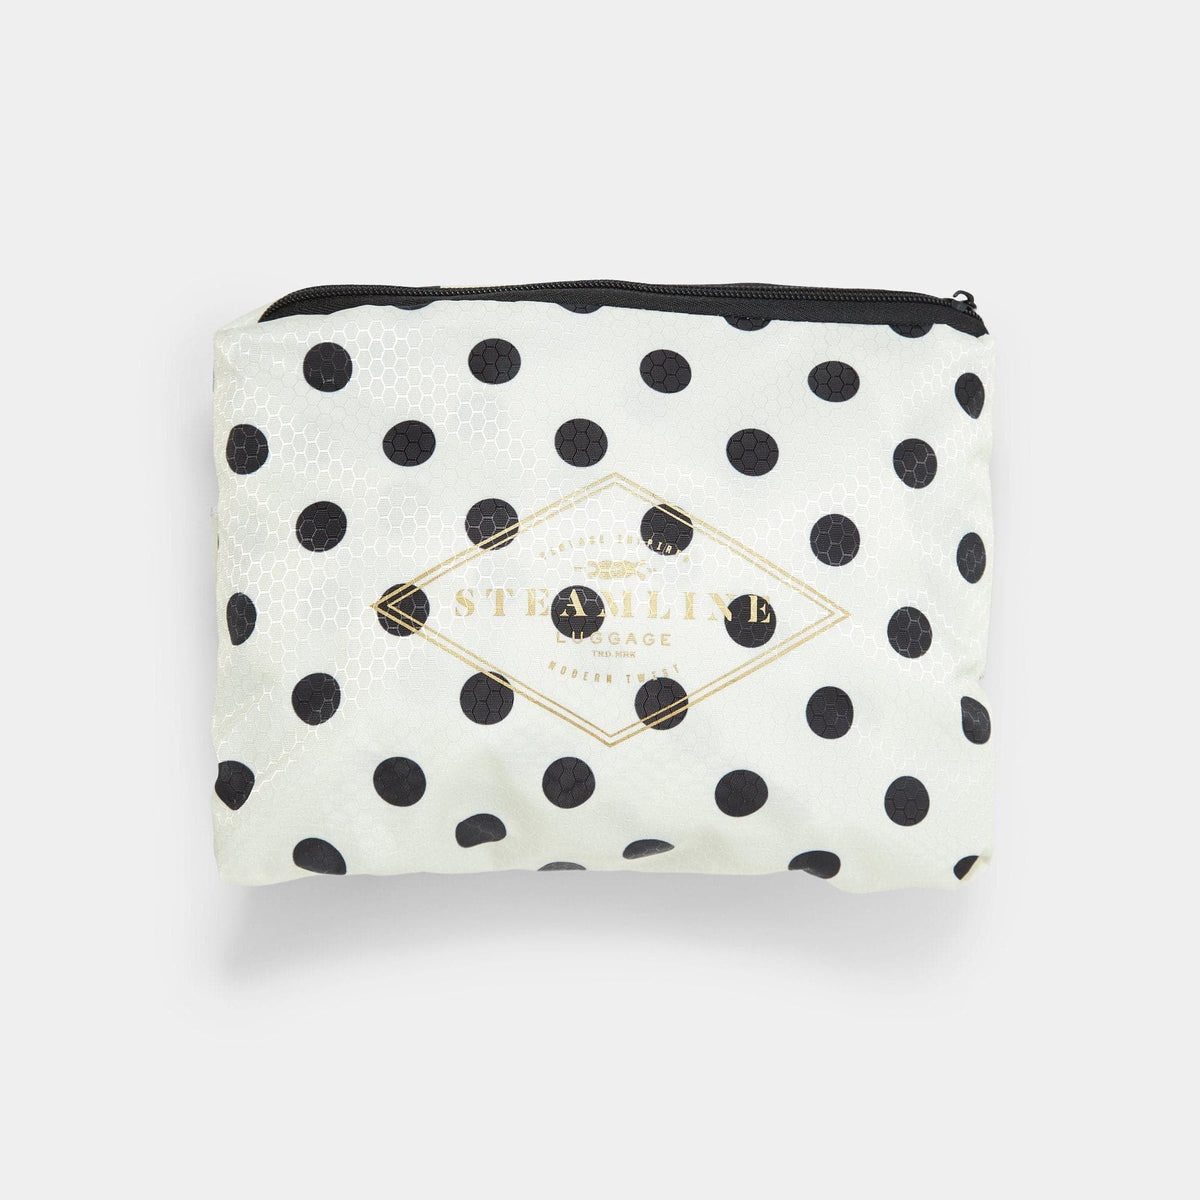 The Polka Dots Protective Cover - Stowaway Size Protective Cover Steamline Luggage 